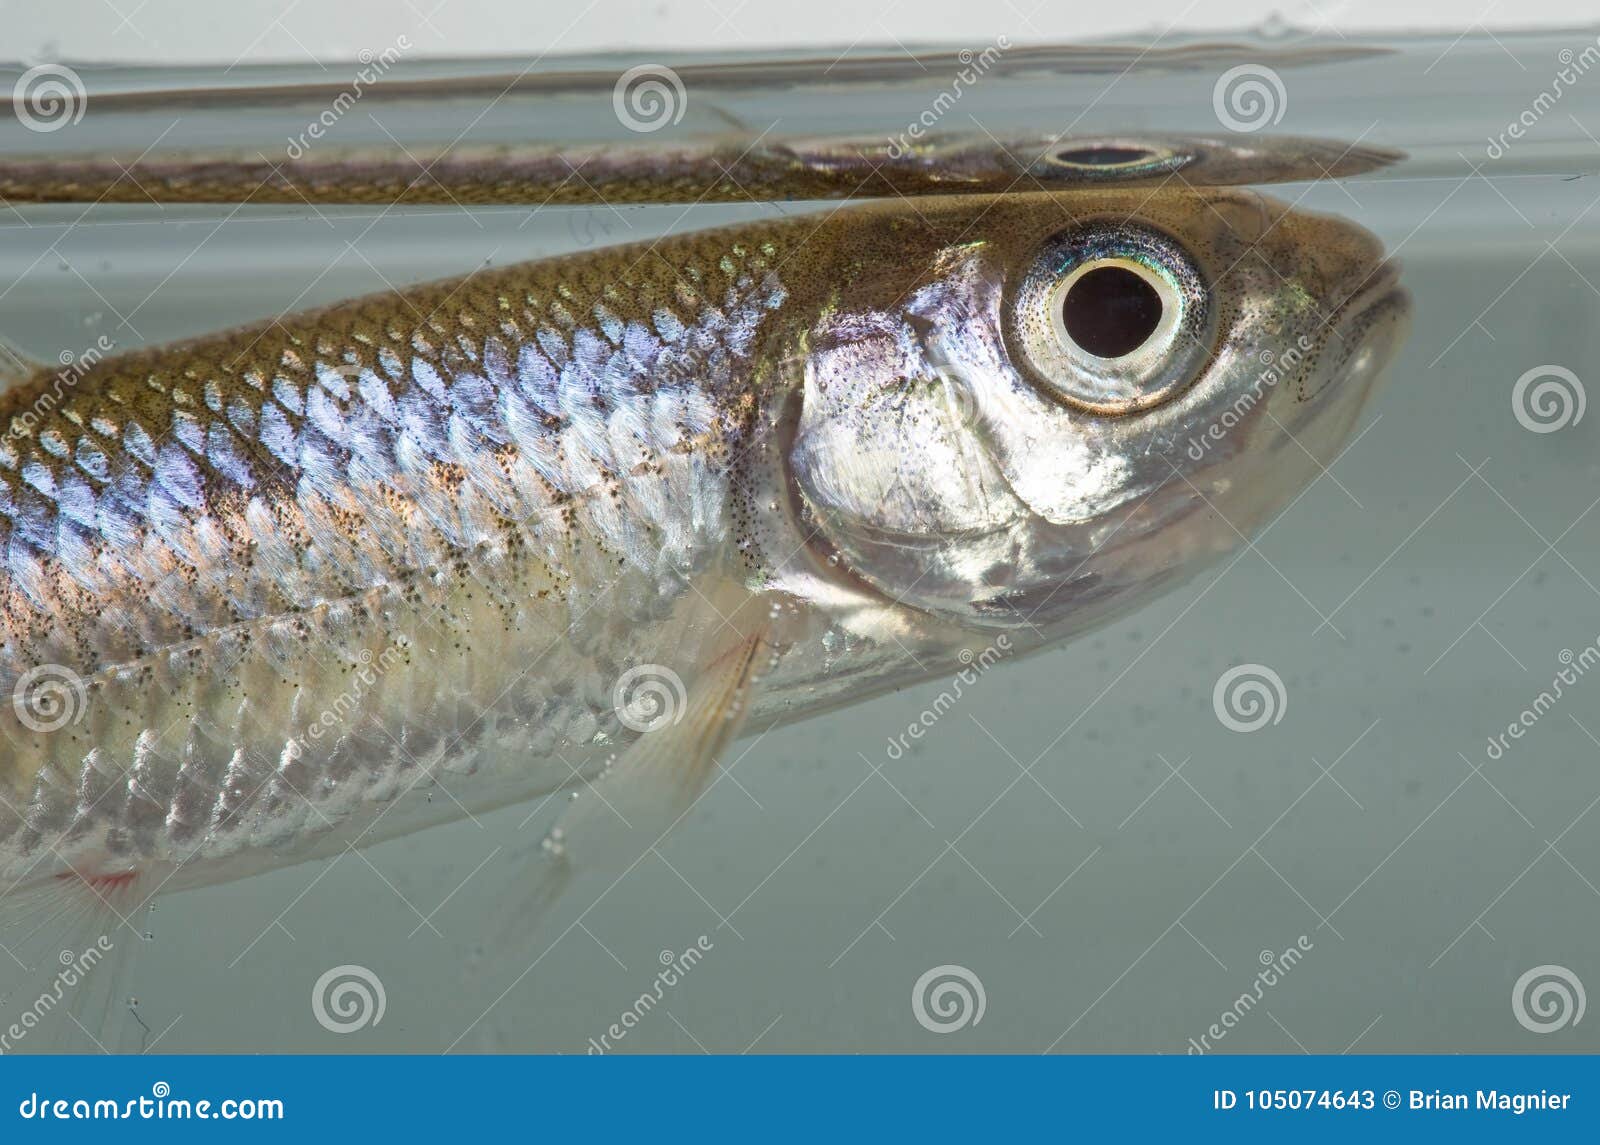 Cyprinid fish stock image. Image of safely, small, tank - 105074643